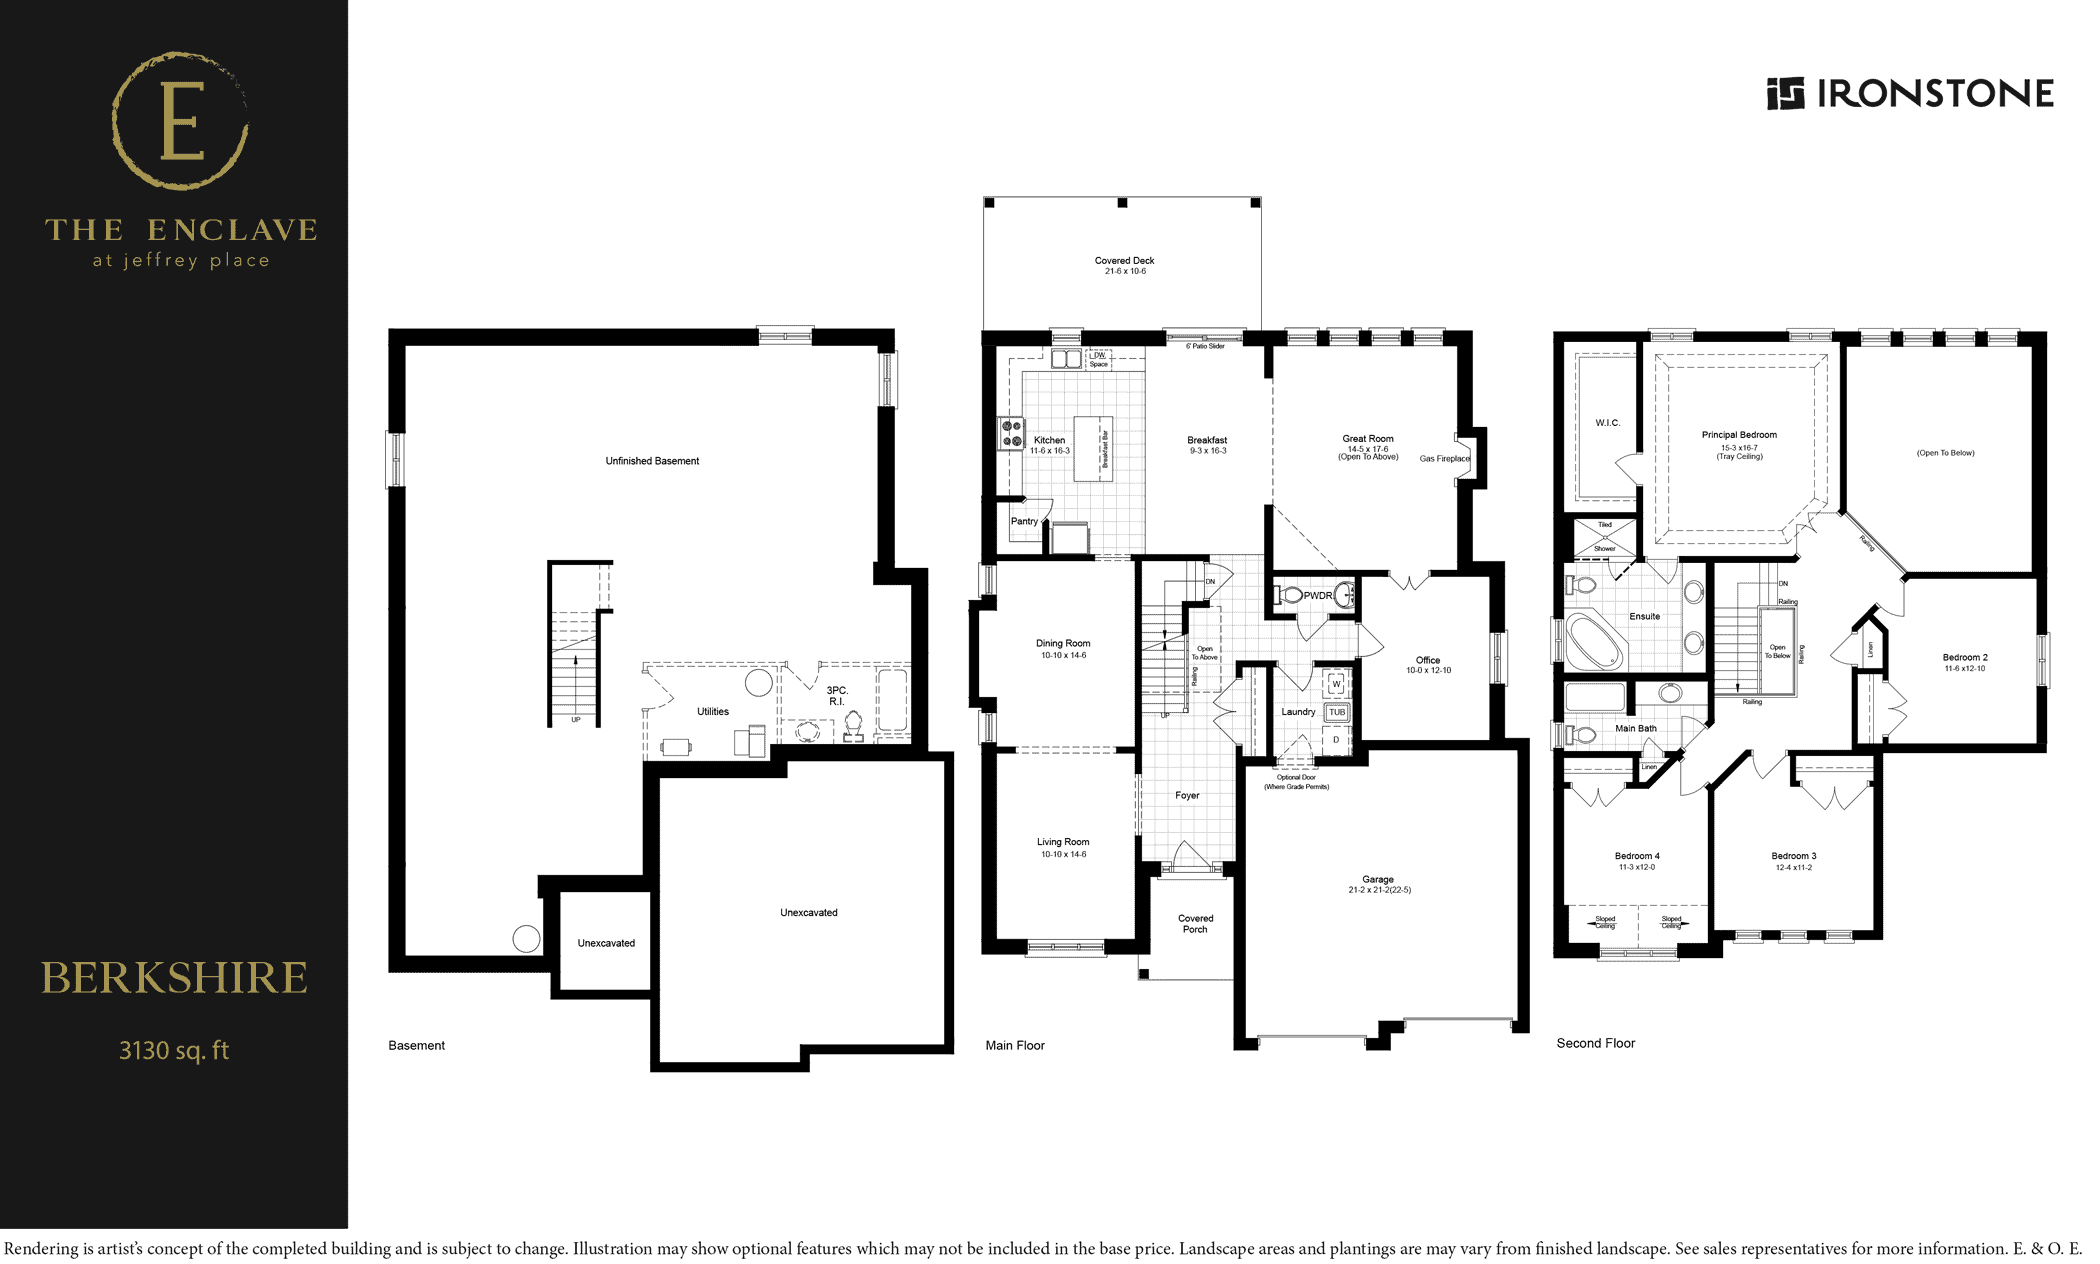  Floor Plan of The Enclave At Jeffrey Place with undefined beds